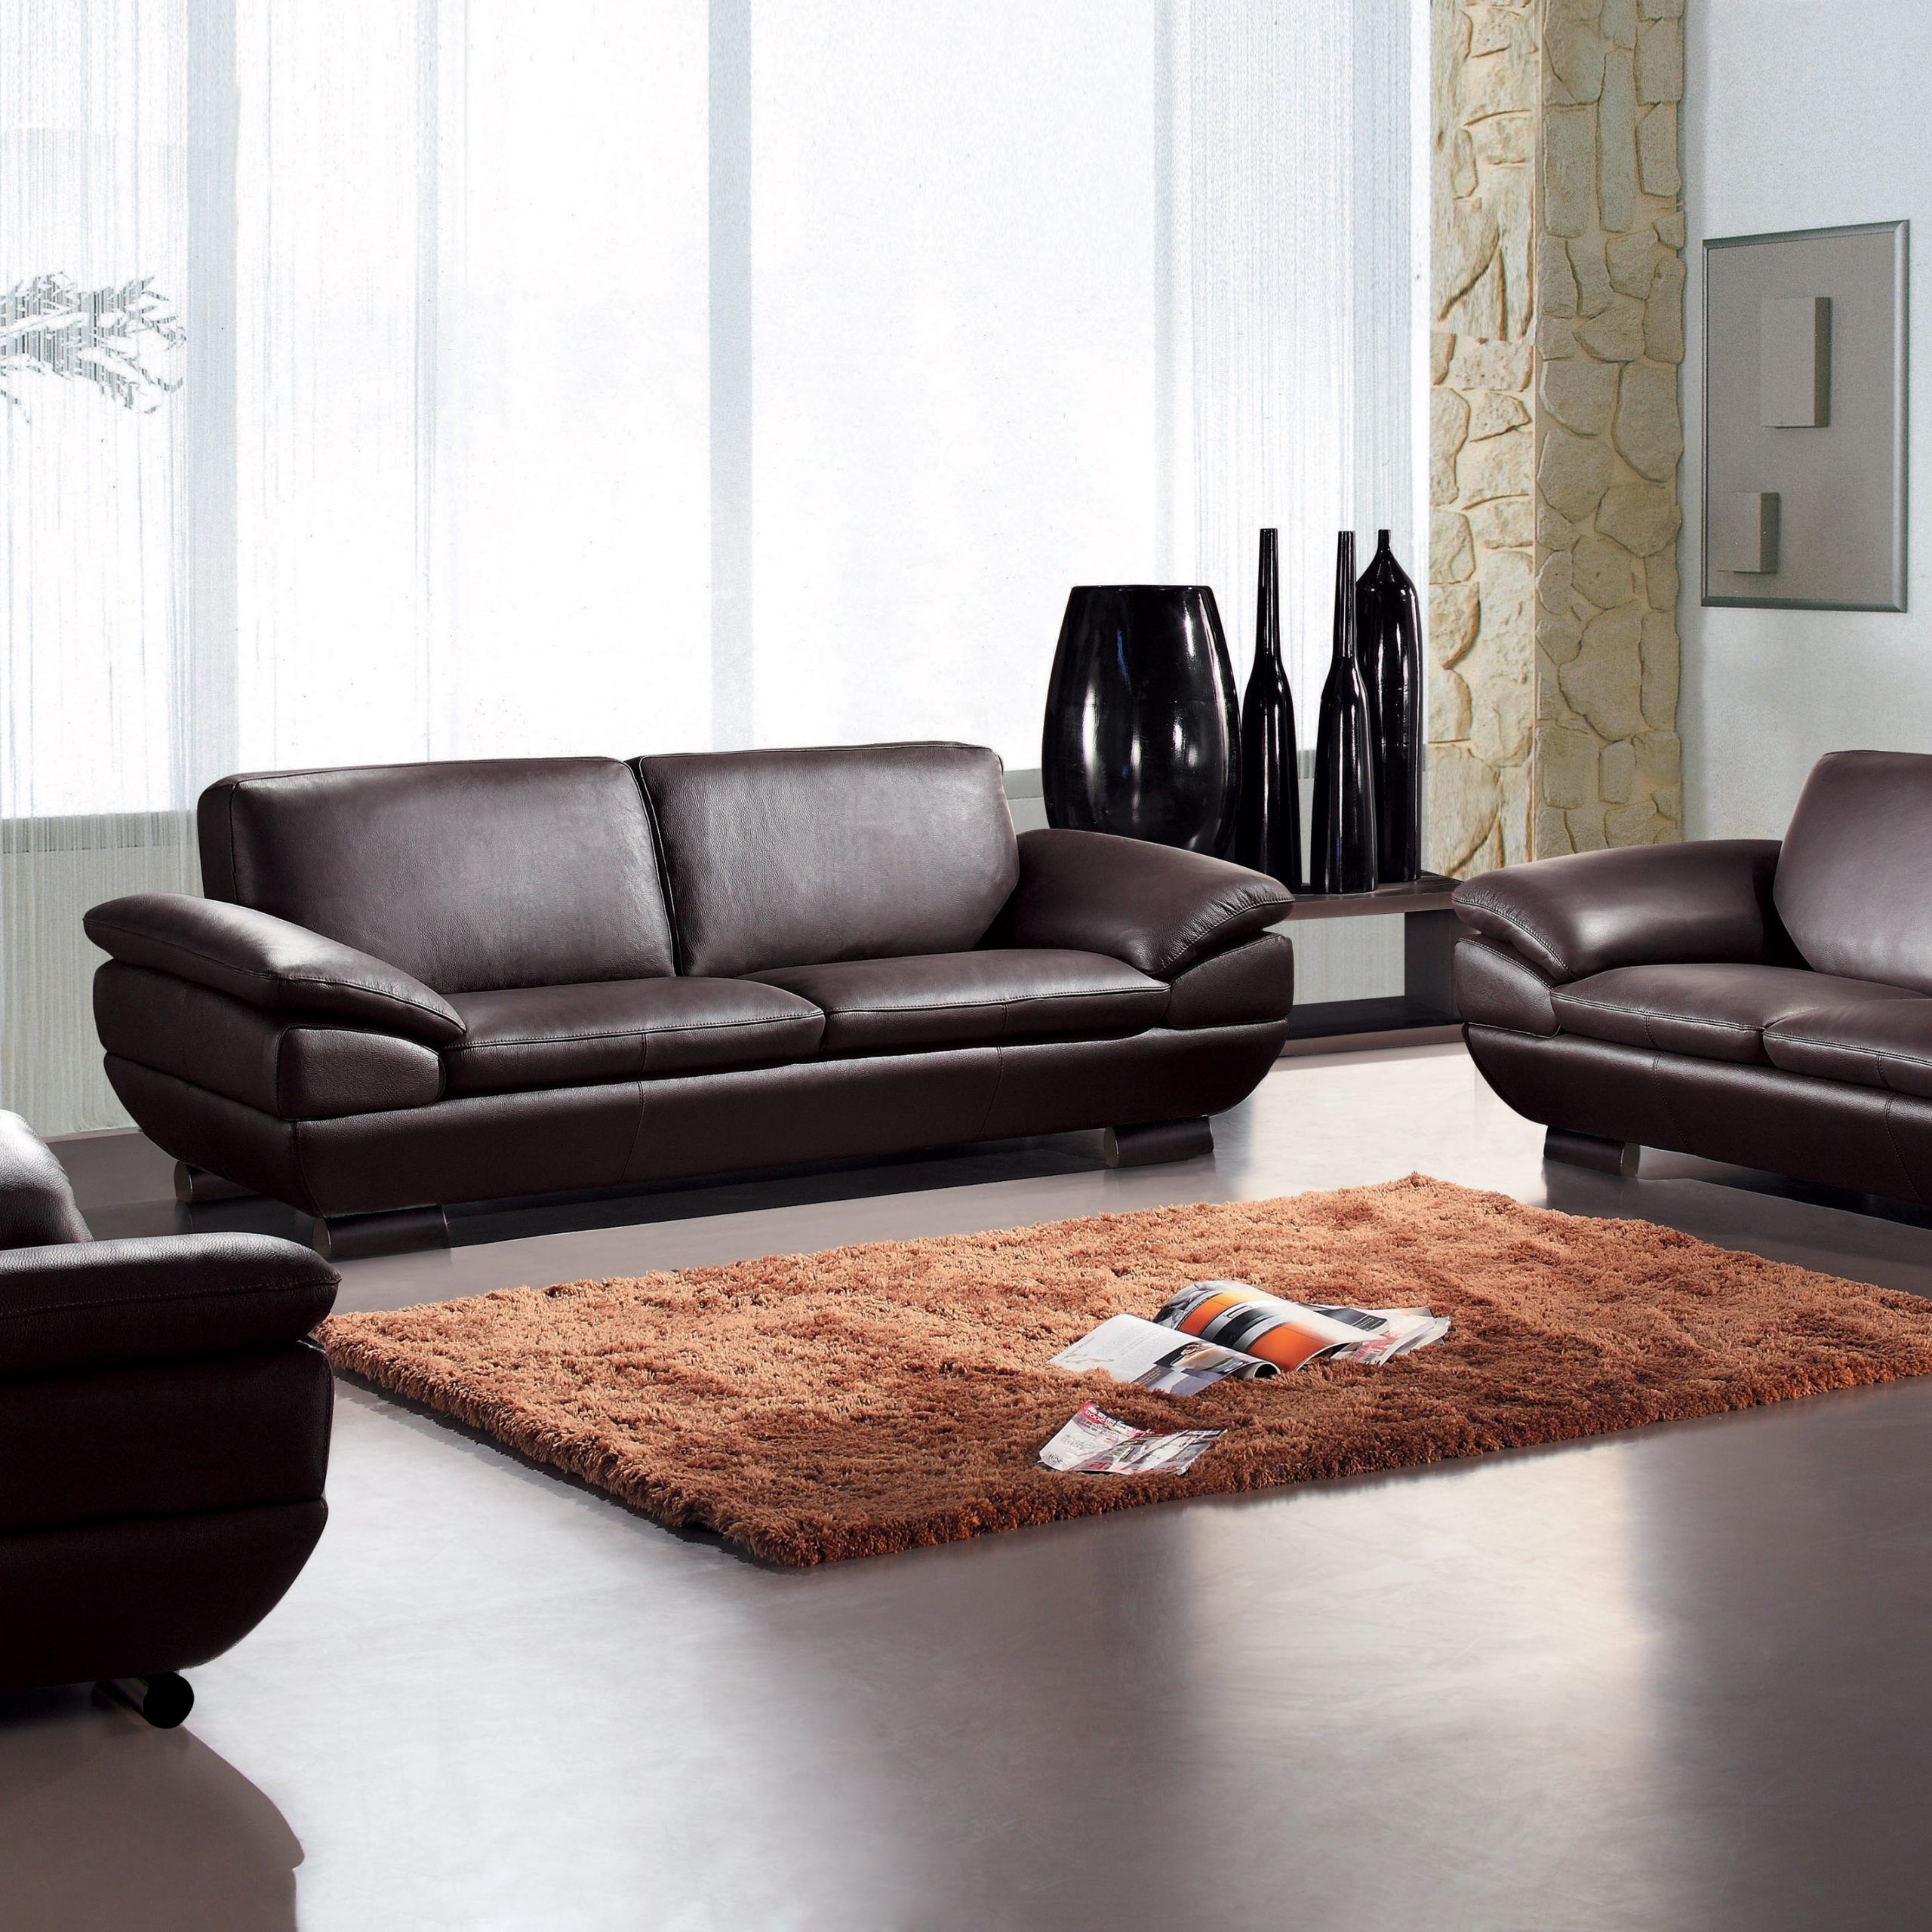 Contemporary Three Piece Sofa Set In Dark Brown Leather Atlanta Georgia Inside 3 Piece Leather Sectional Sofa Sets (View 17 of 20)